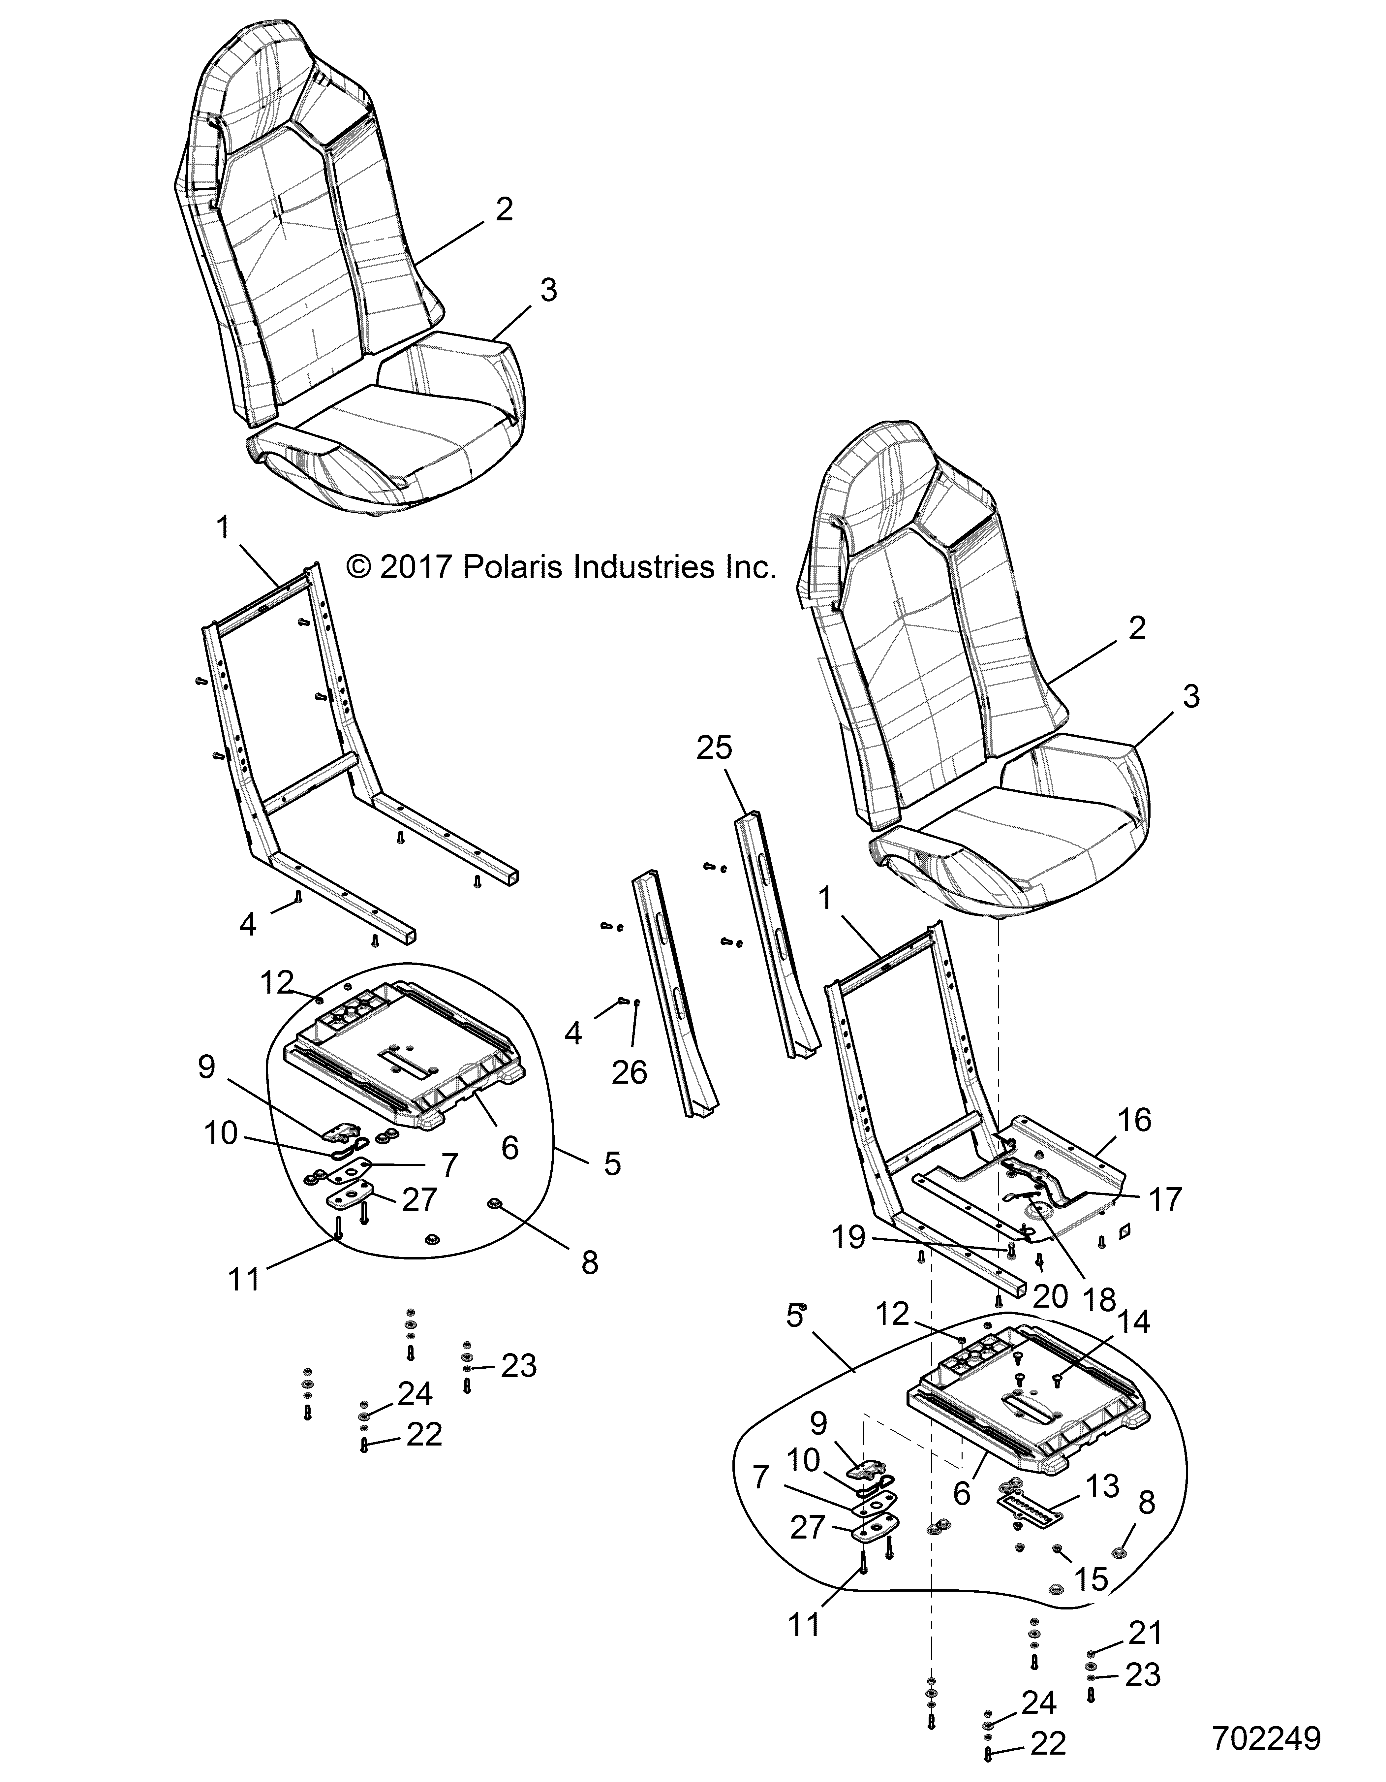 Part Number : 2688032 SEAT BOTTOM ASSEMBLY